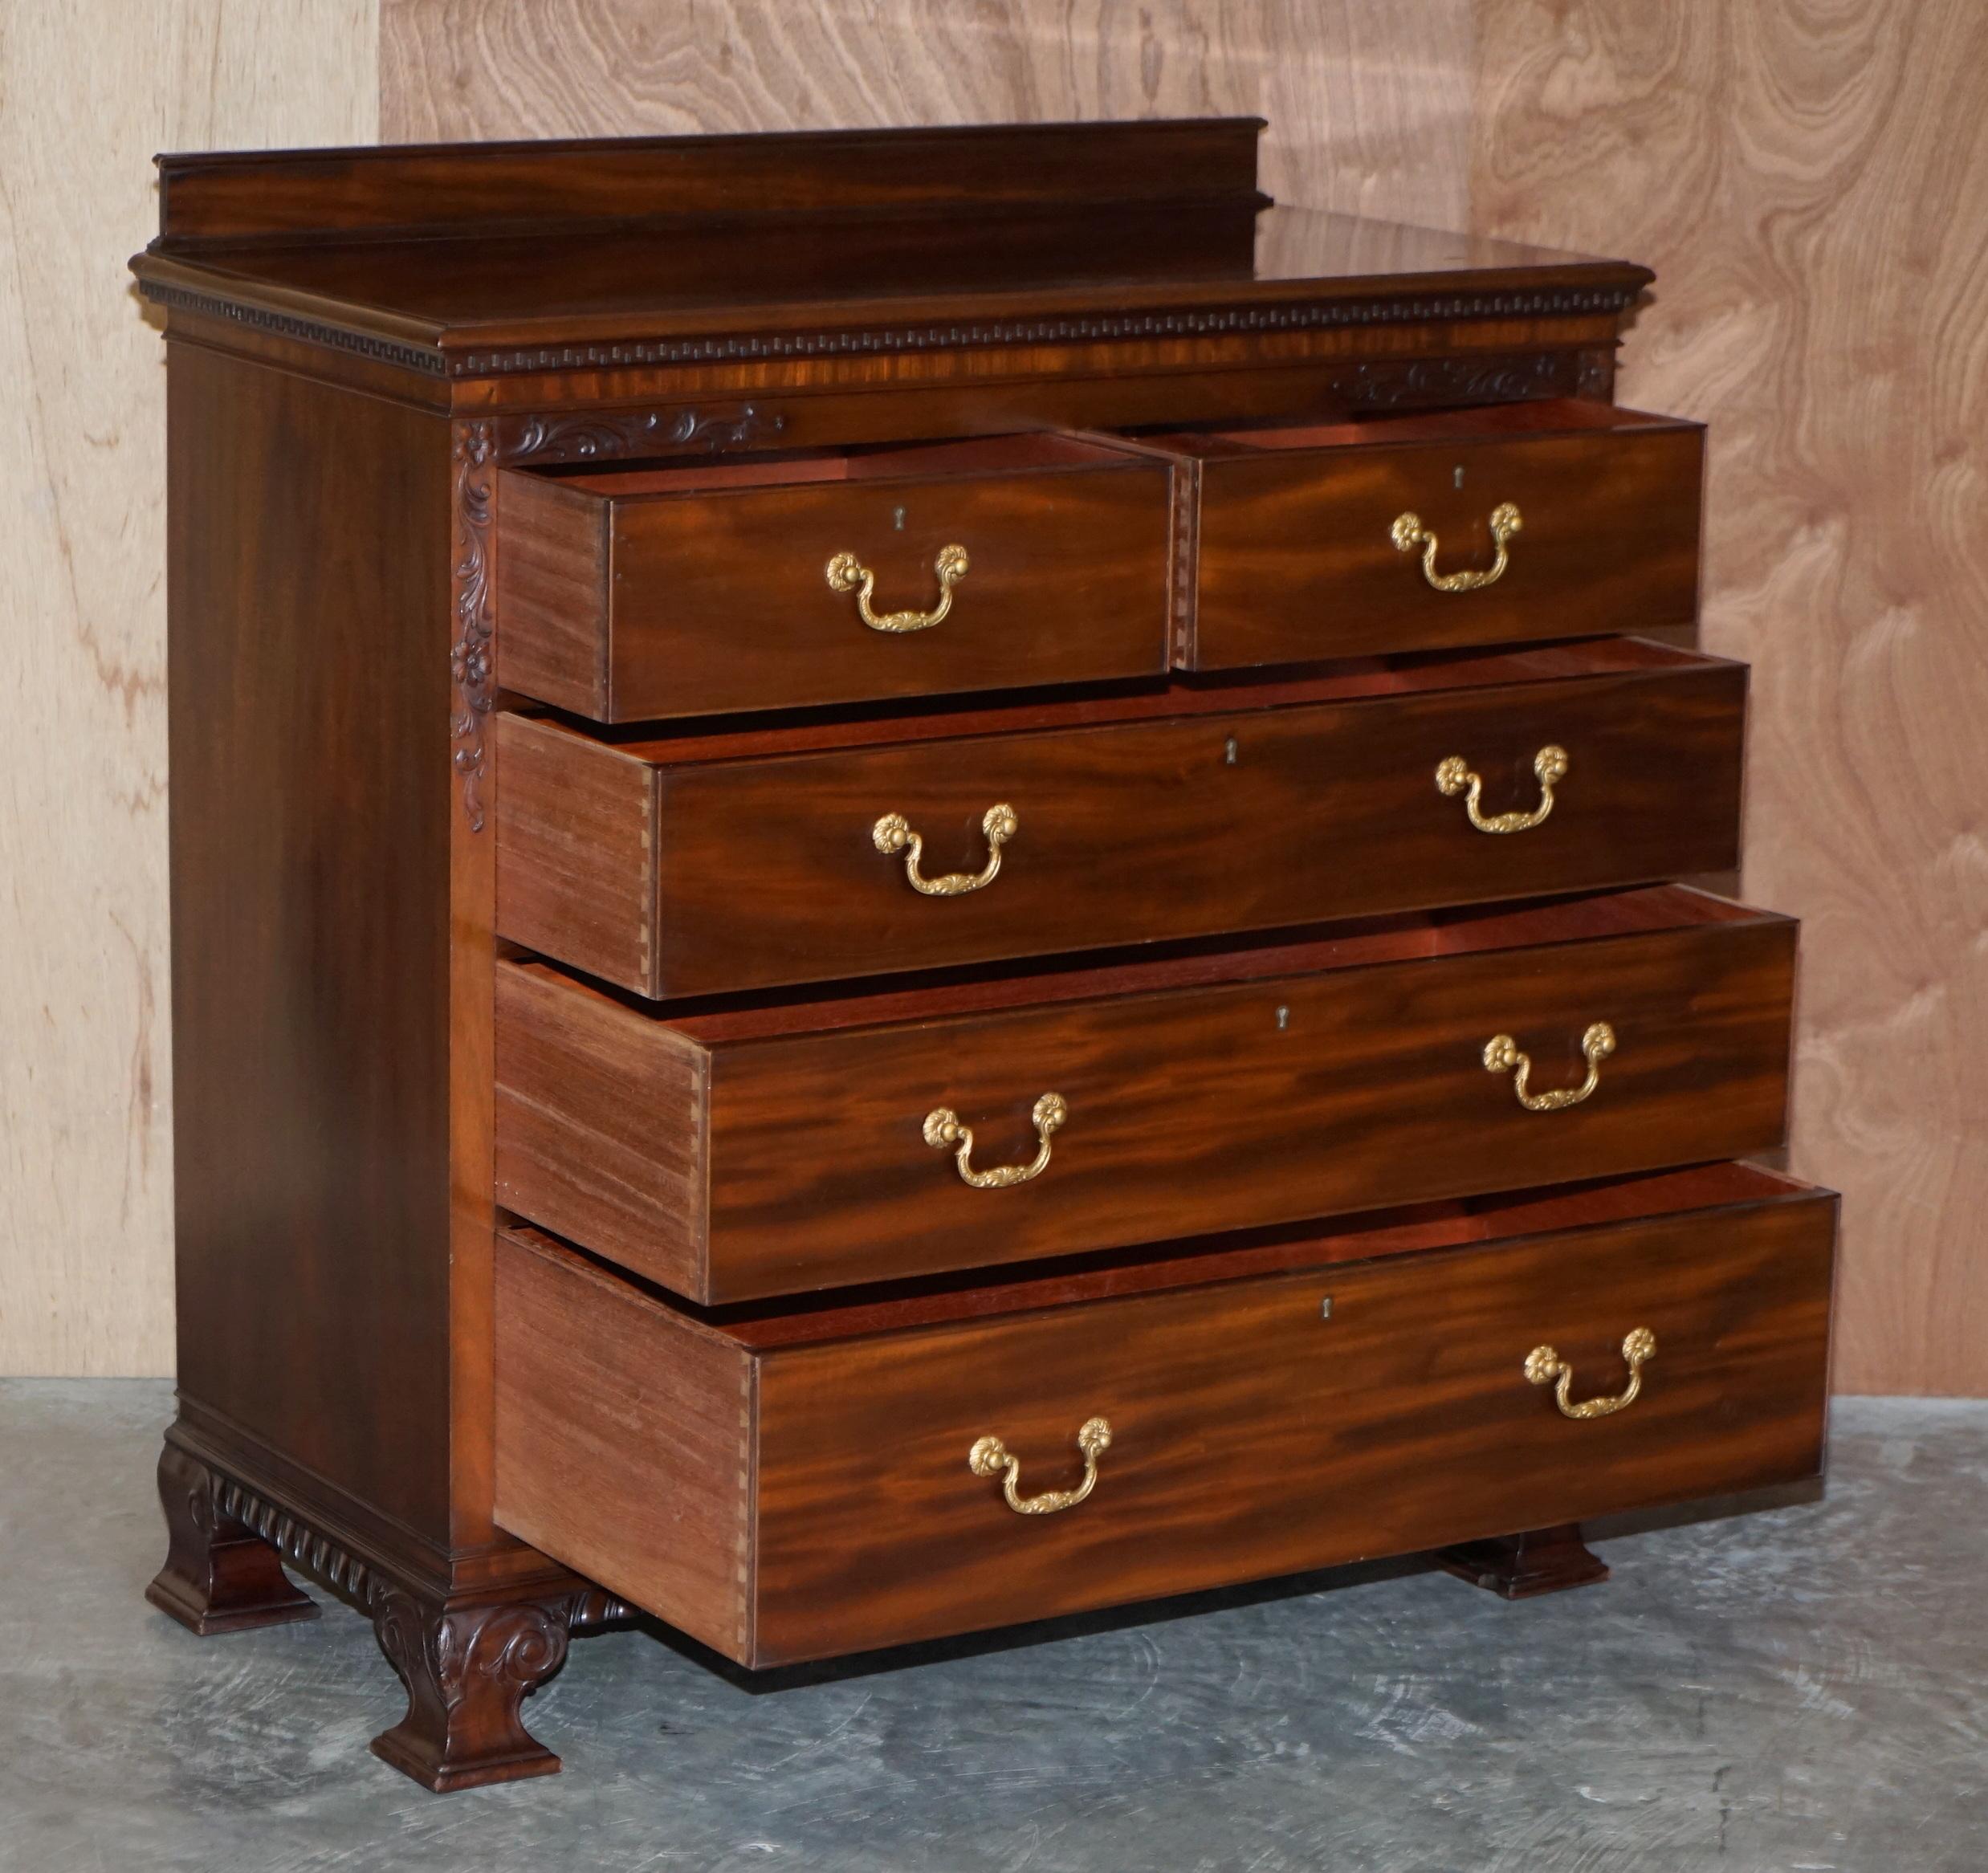 Exquisite Quality circa 1900 Honduras Hardwood Chest of Drawers Part of a Suite 8